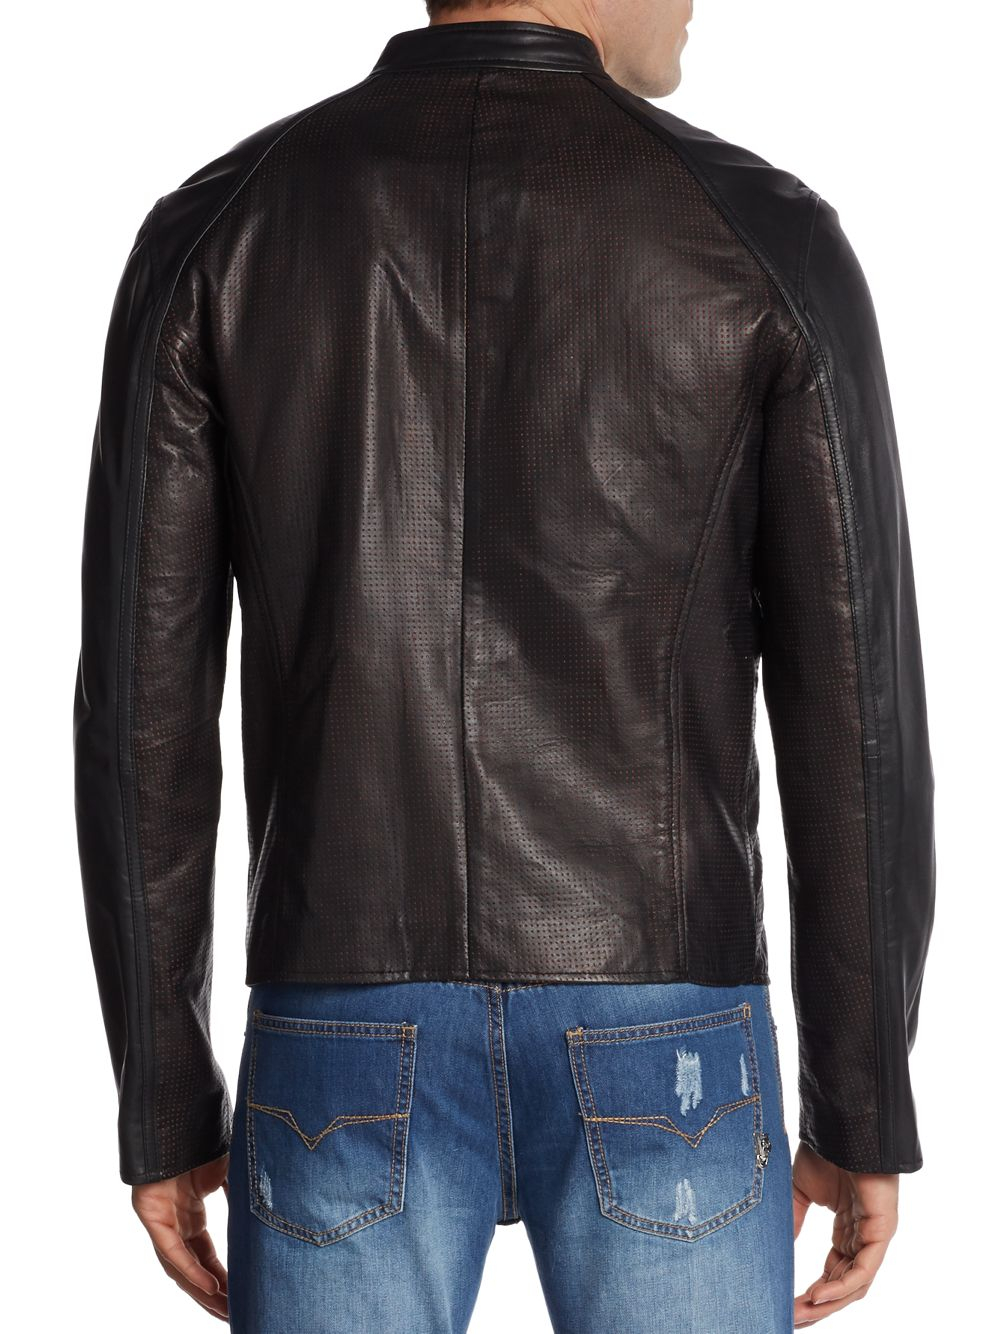 Lyst - Versace jeans Perforated Leather Moto Jacket in Brown for Men